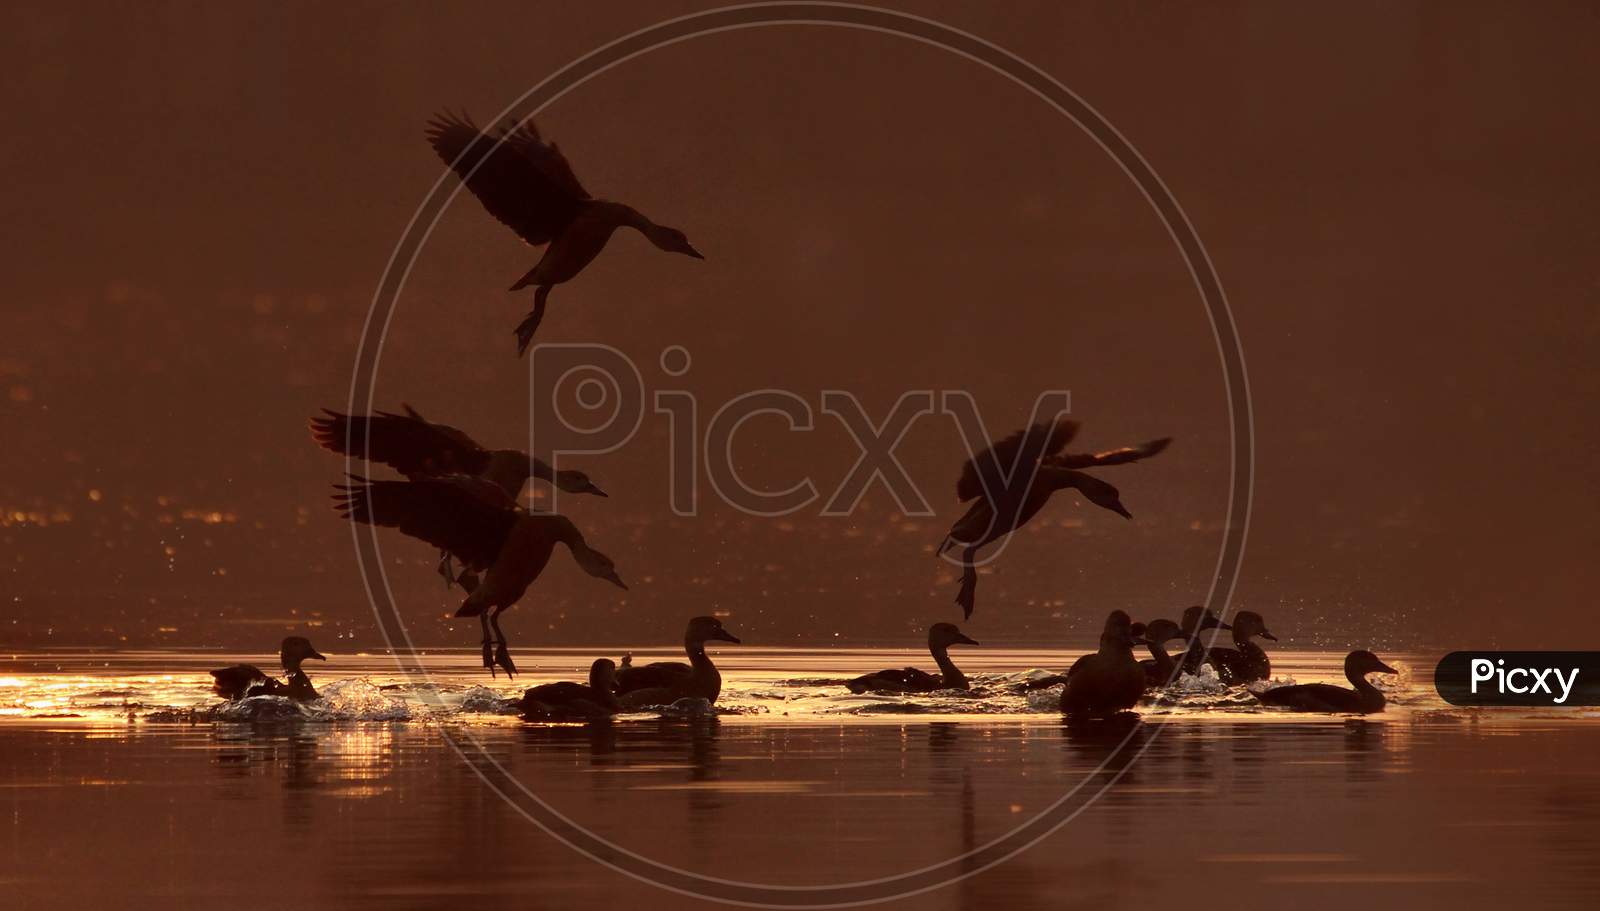 lesser whistling duck in a lake